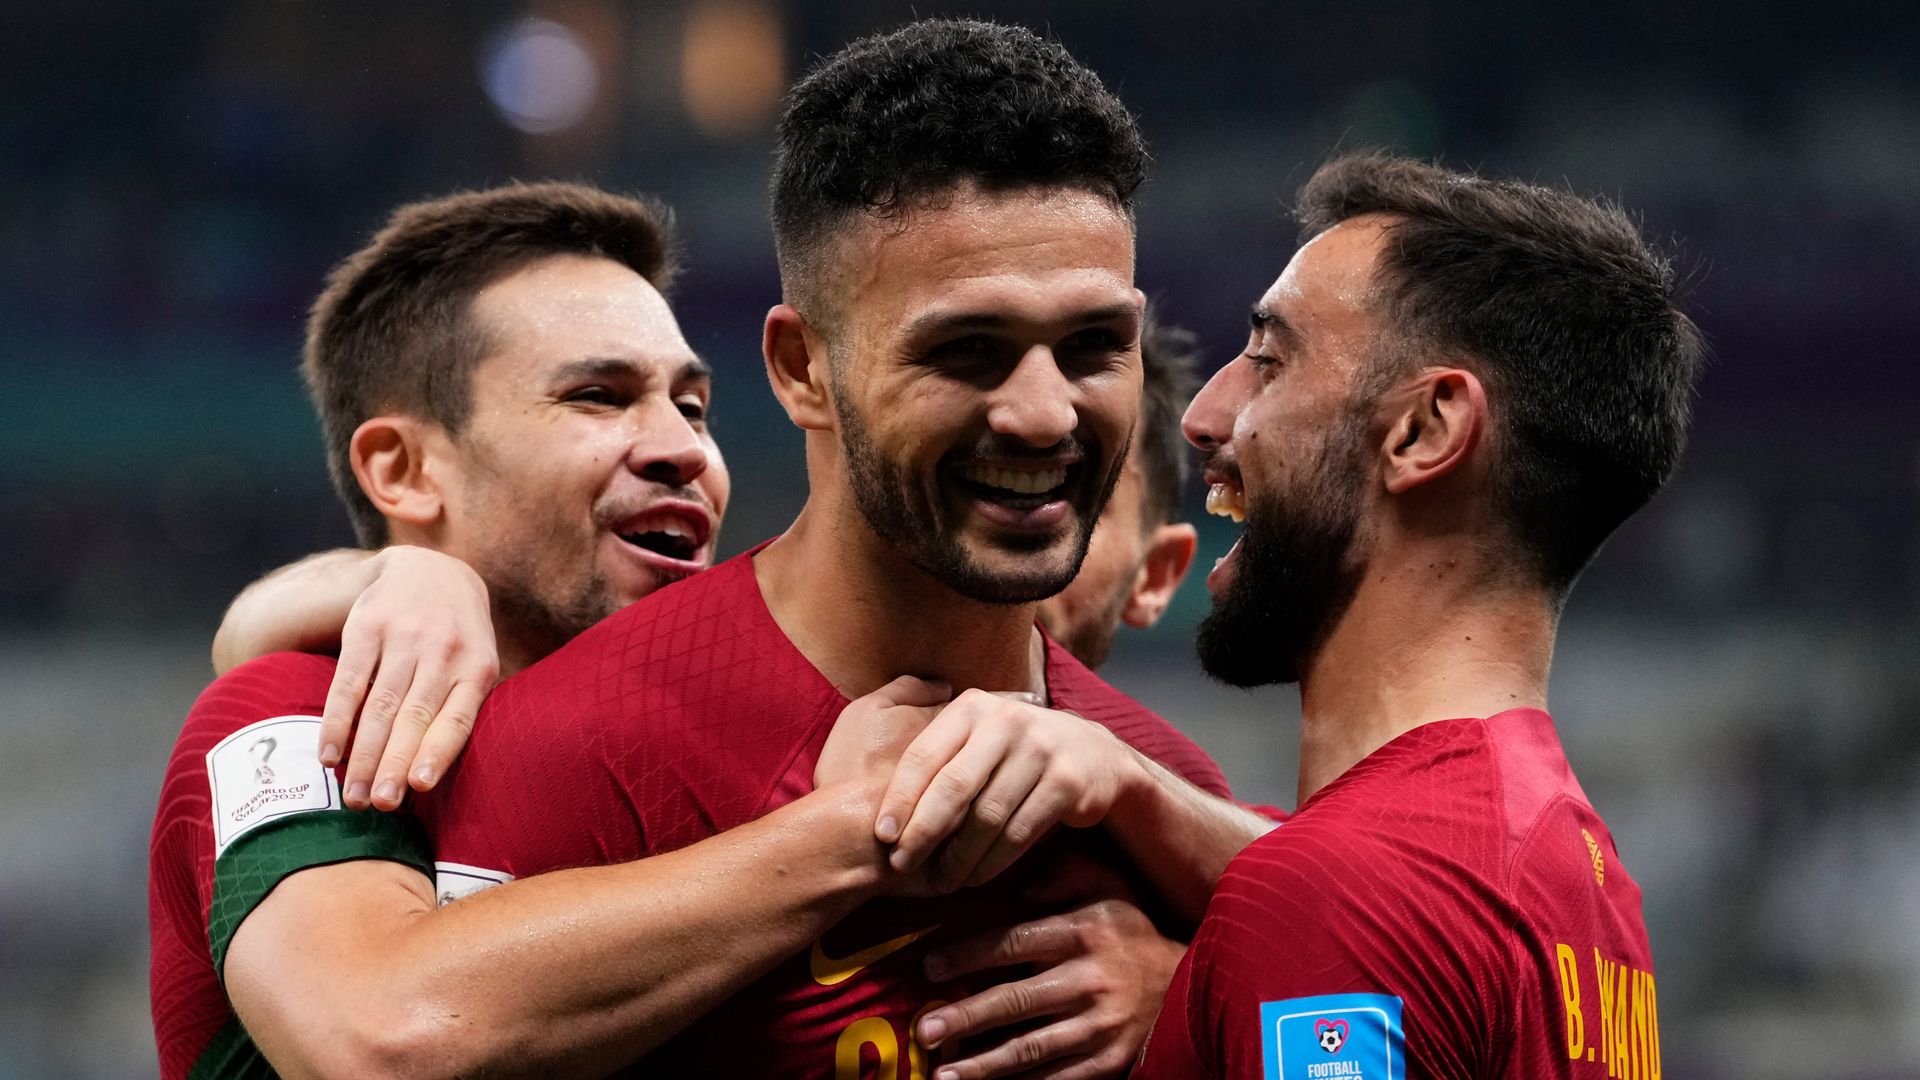 The World Cup Round of 16 ended in a goal-fest as Portugal put six past a distressed Switzerland side to burst into the Quarter Finals